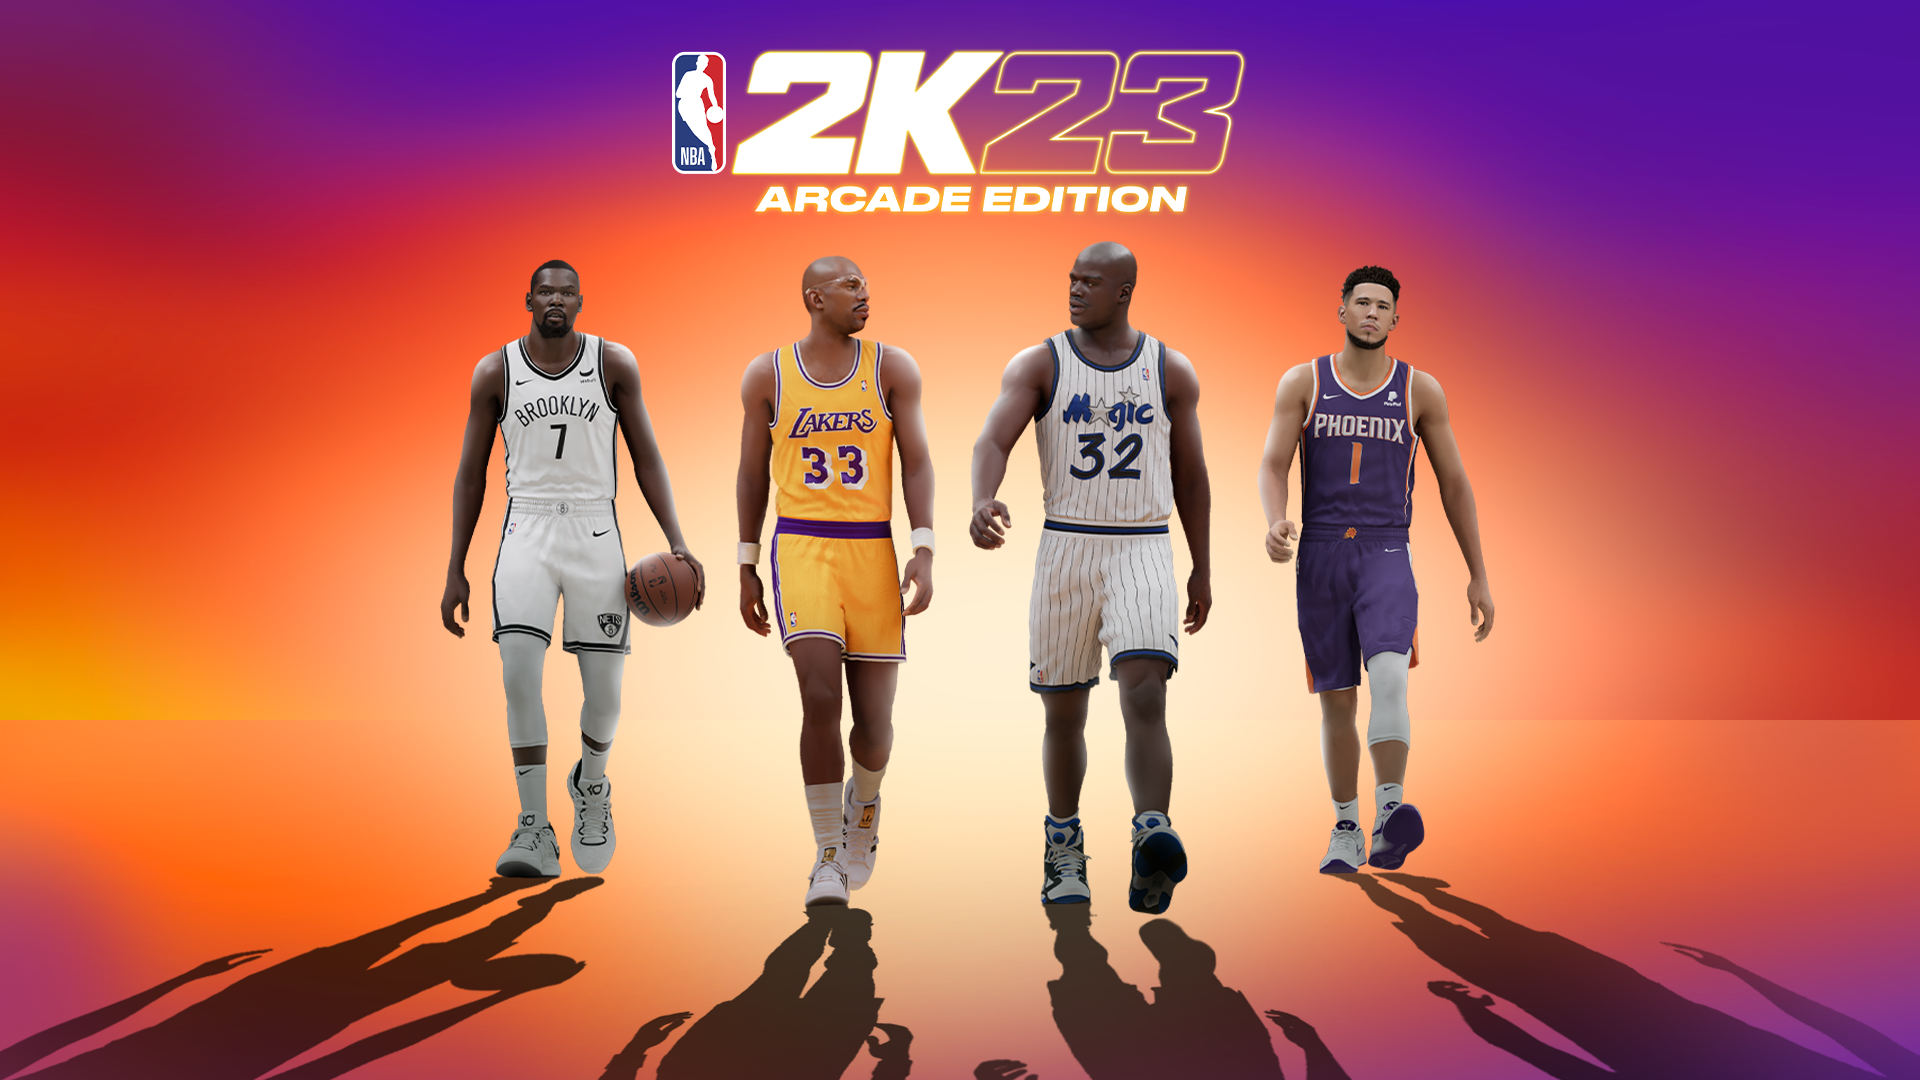 NBA 2K23 Arcade Edition Available Now Exclusively on Apple Arcade